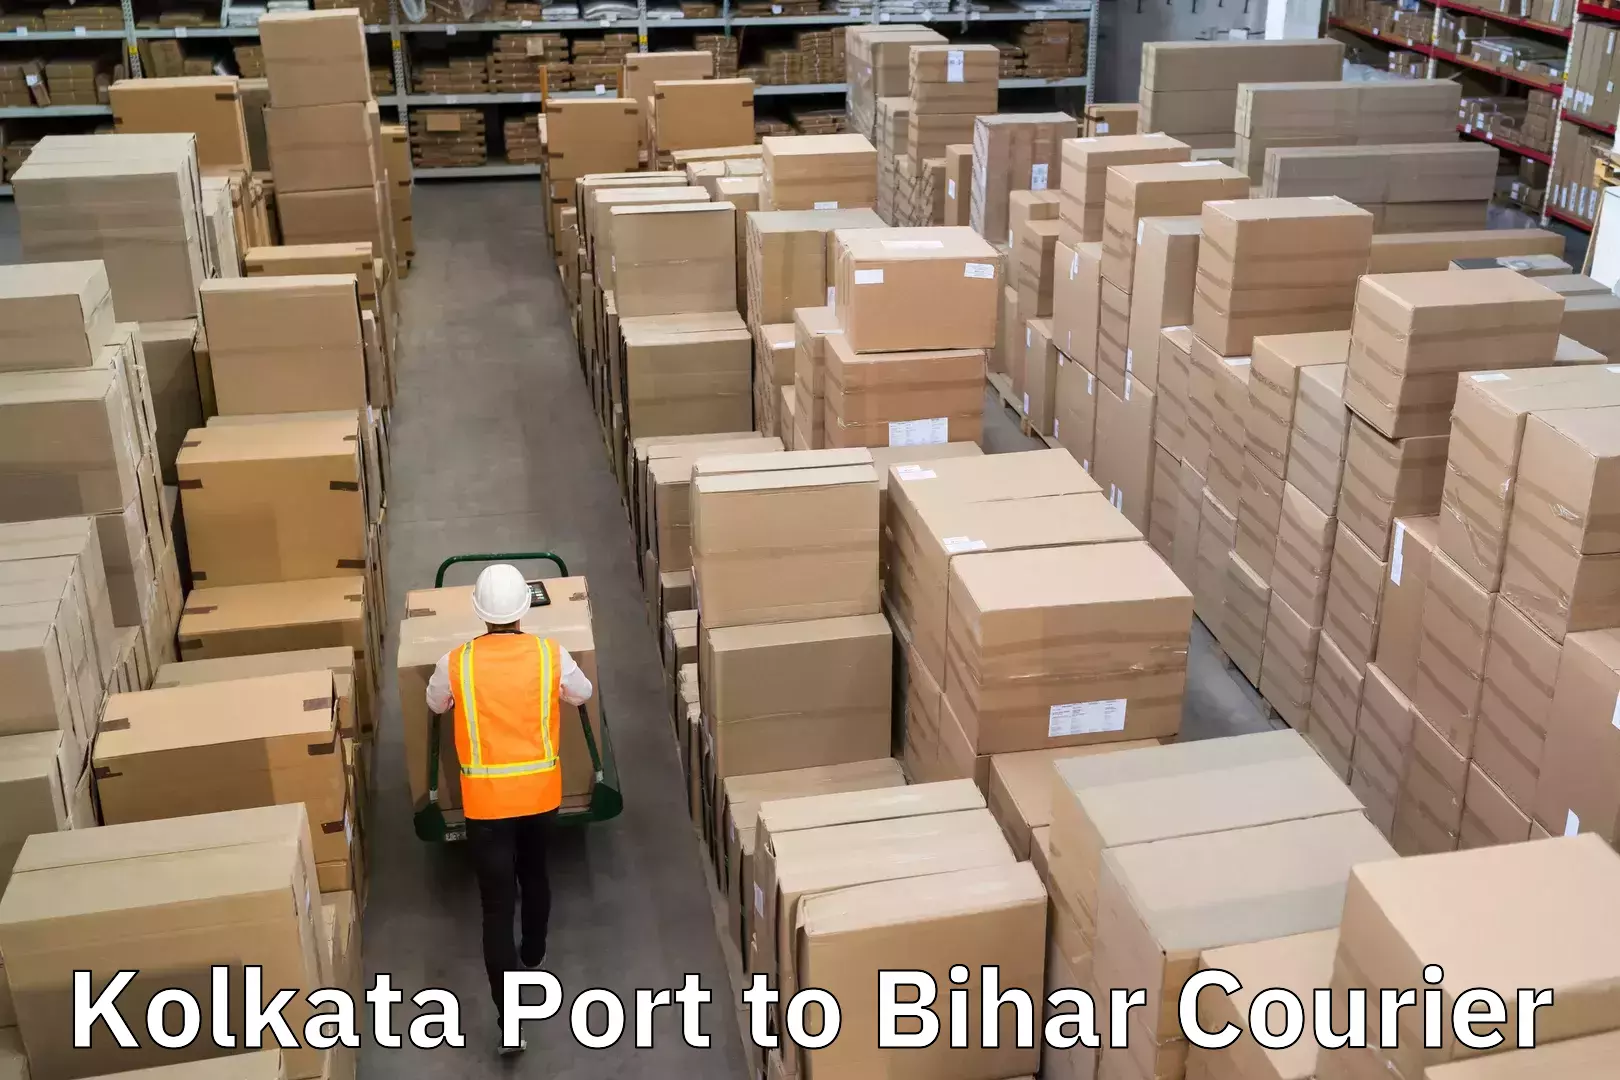 Express package delivery Kolkata Port to Bihar